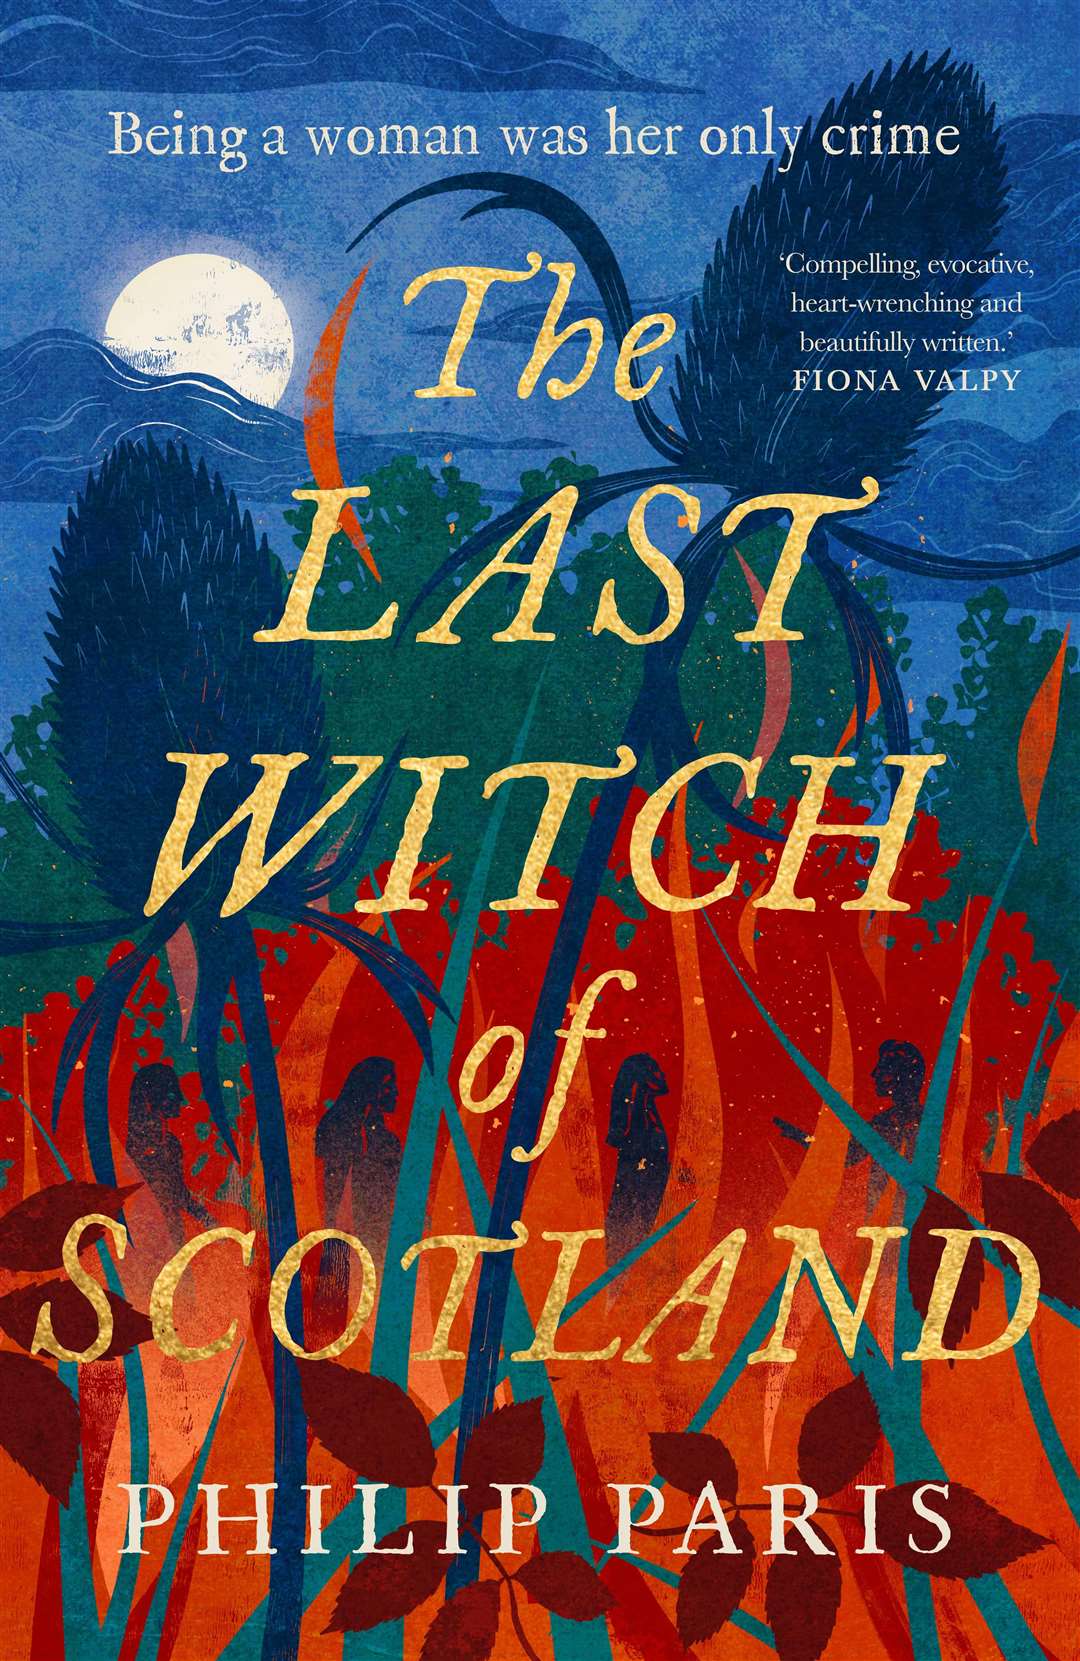 Philip Paris's new novel tells the story of witch Janet Horne and her daughter.